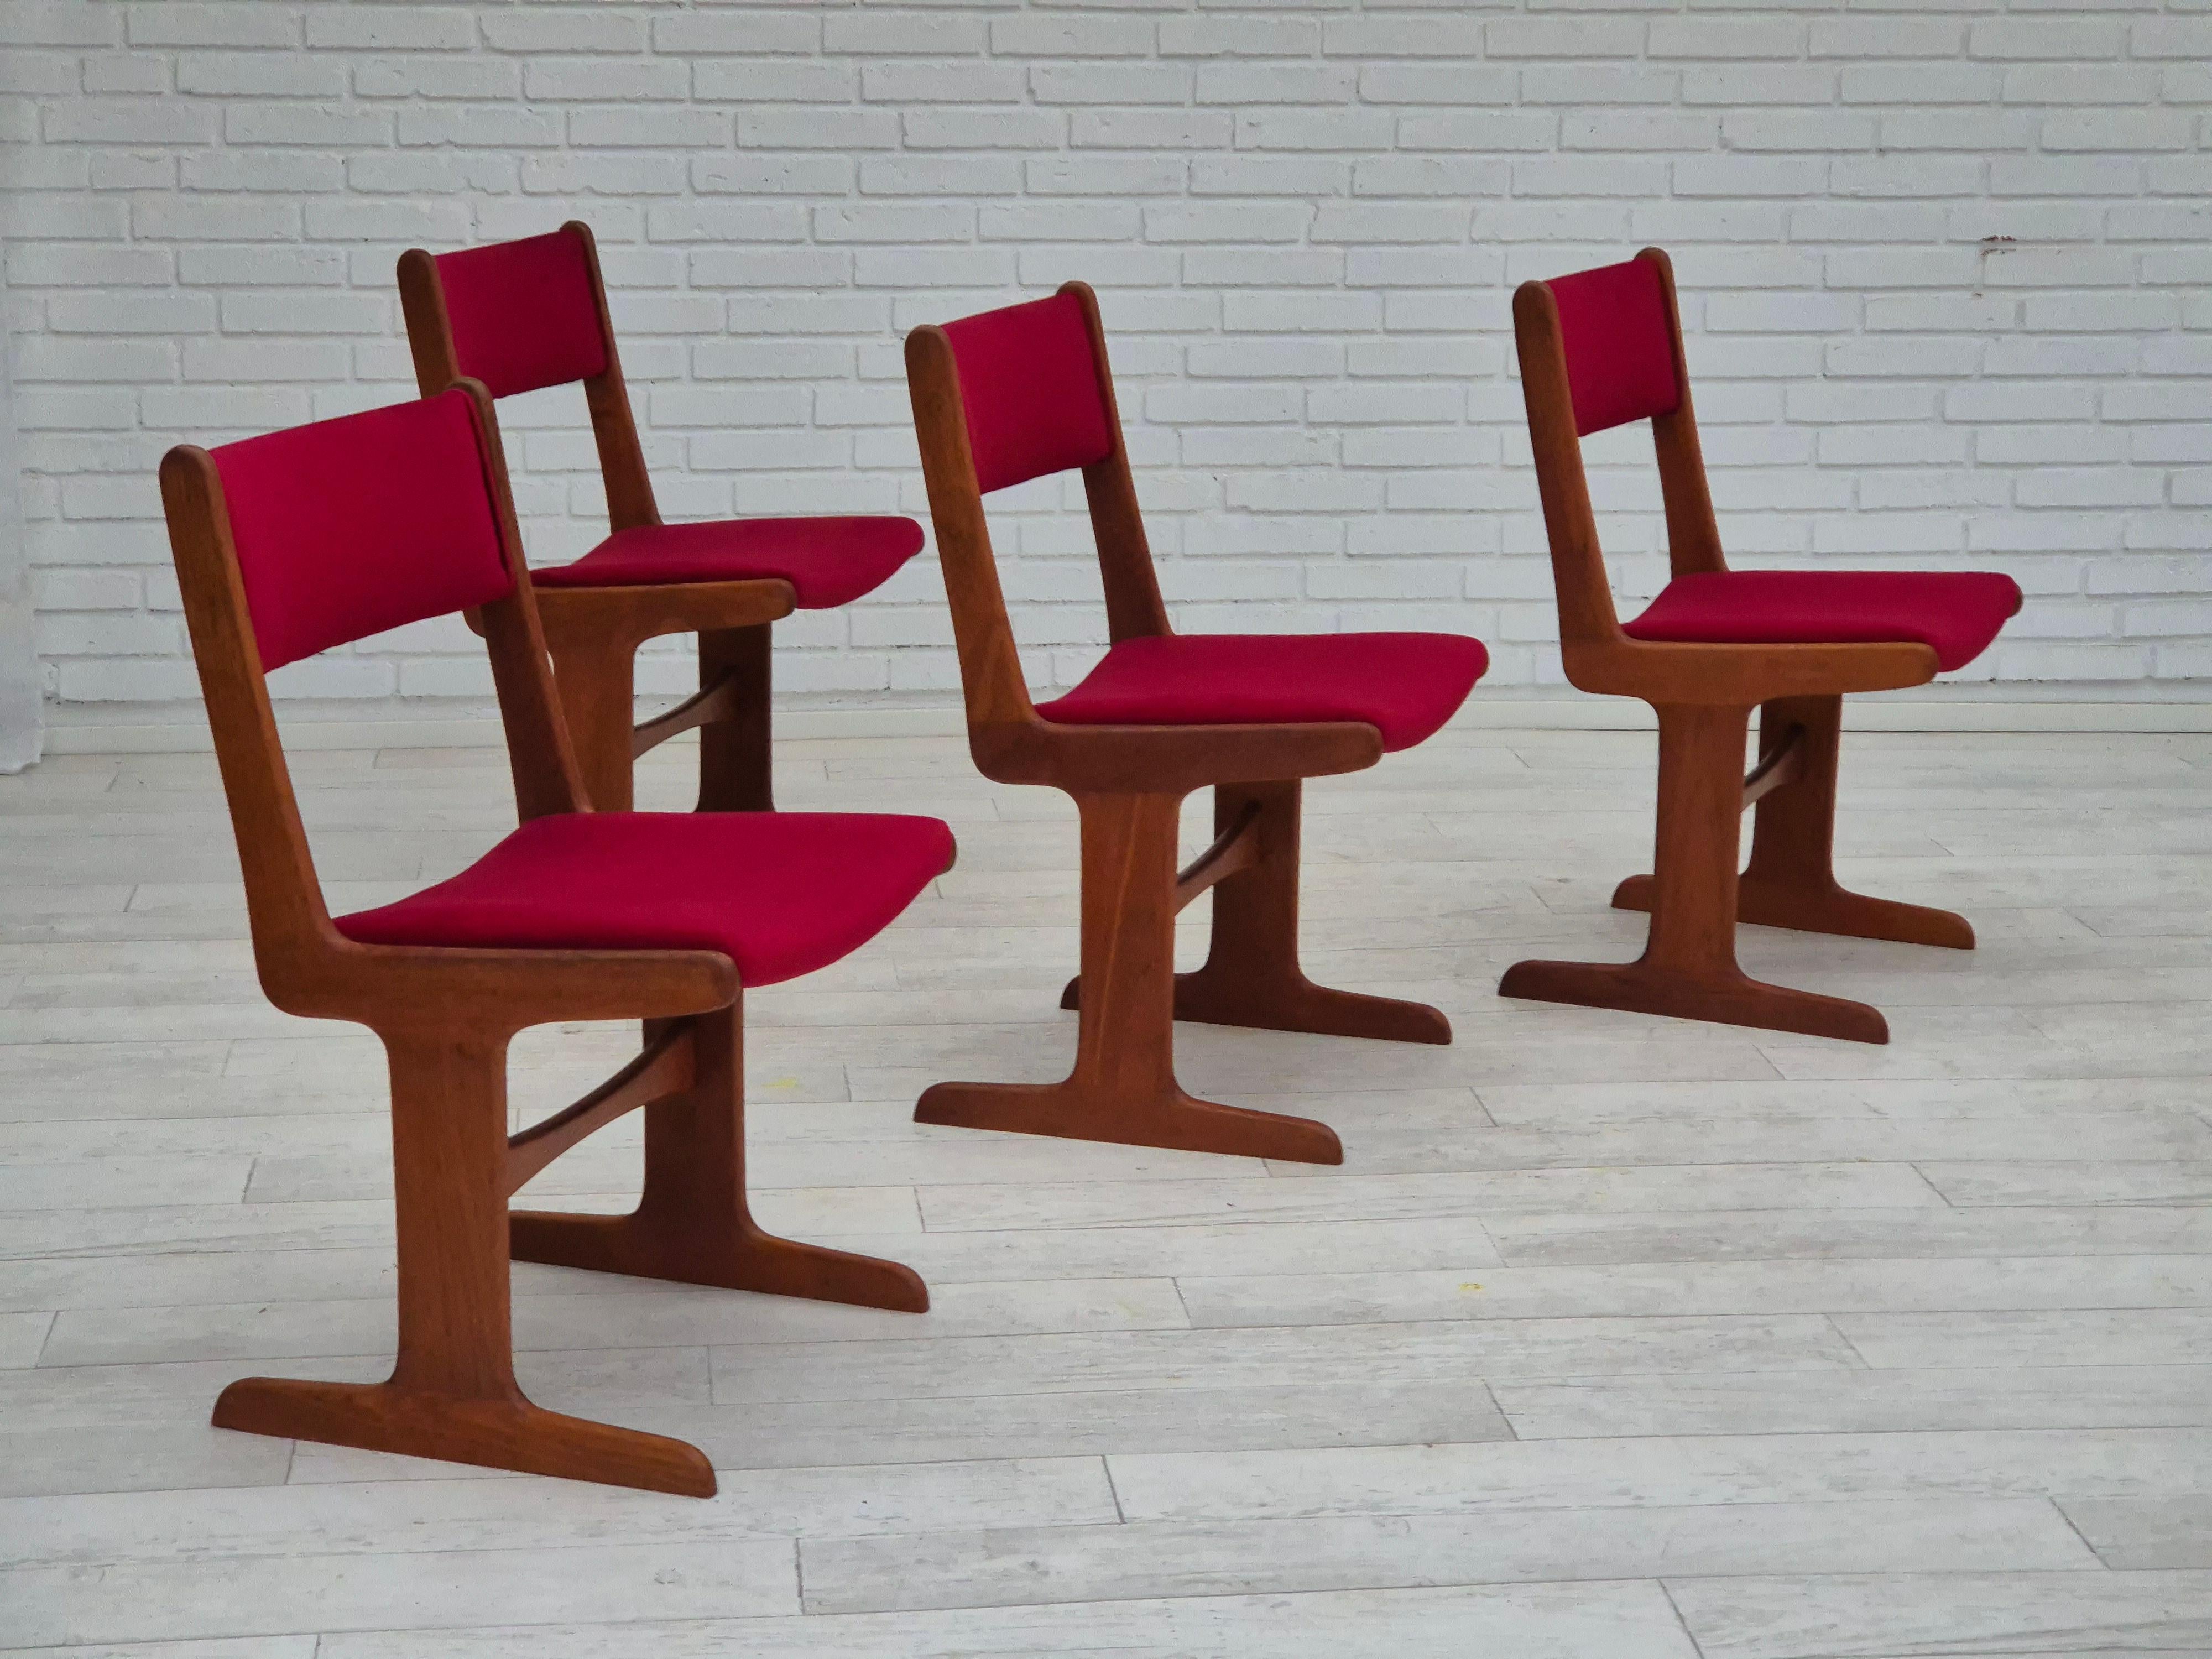 1970s, set of 4 reupholstered Danish chairs. Renewed teak wood, cherry-red furniture velour. Manufactured by Danish furniture manufacturer Farsø Møbelfabrik in about 1970. Reupholstered by craftsman.